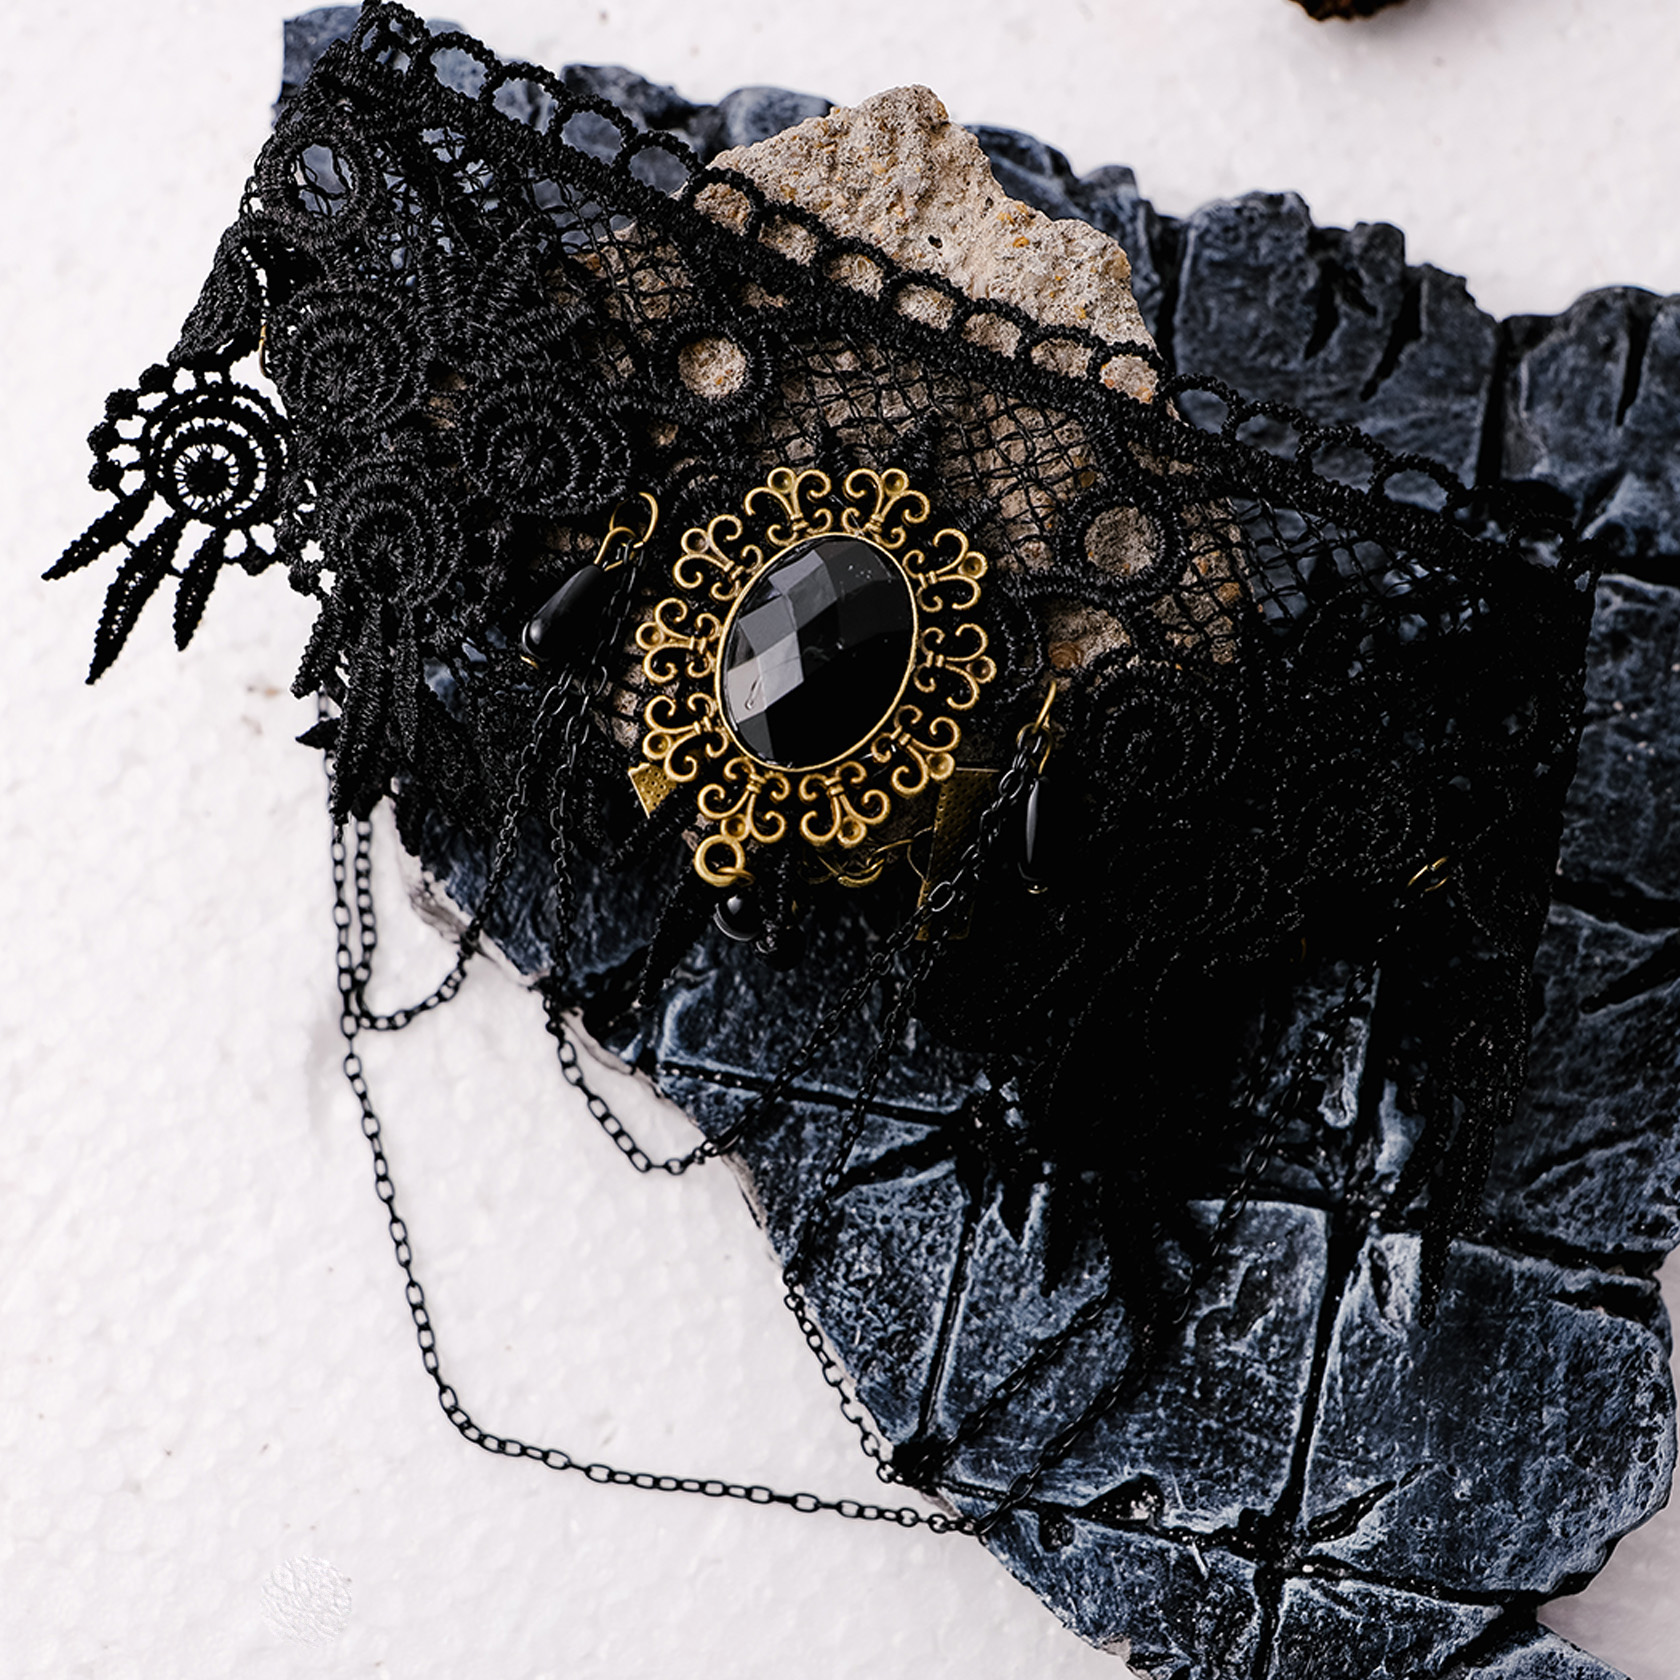 Vintage black lace choker necklace women girls gothic collar for Halloween outfits